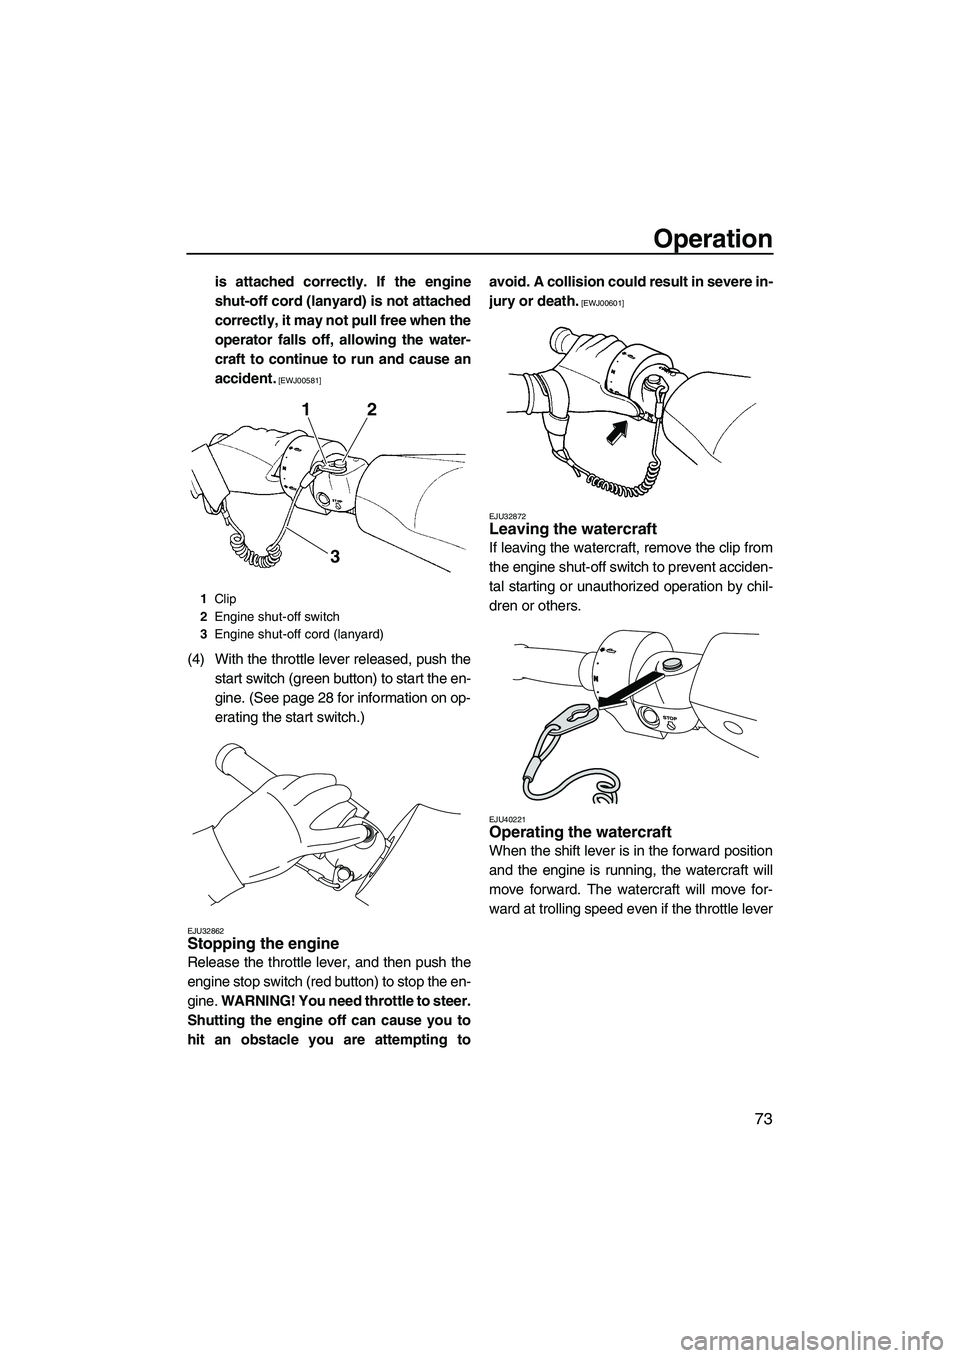 YAMAHA SVHO 2011  Owners Manual Operation
73
is attached correctly. If the engine
shut-off cord (lanyard) is not attached
correctly, it may not pull free when the
operator falls off, allowing the water-
craft to continue to run and 